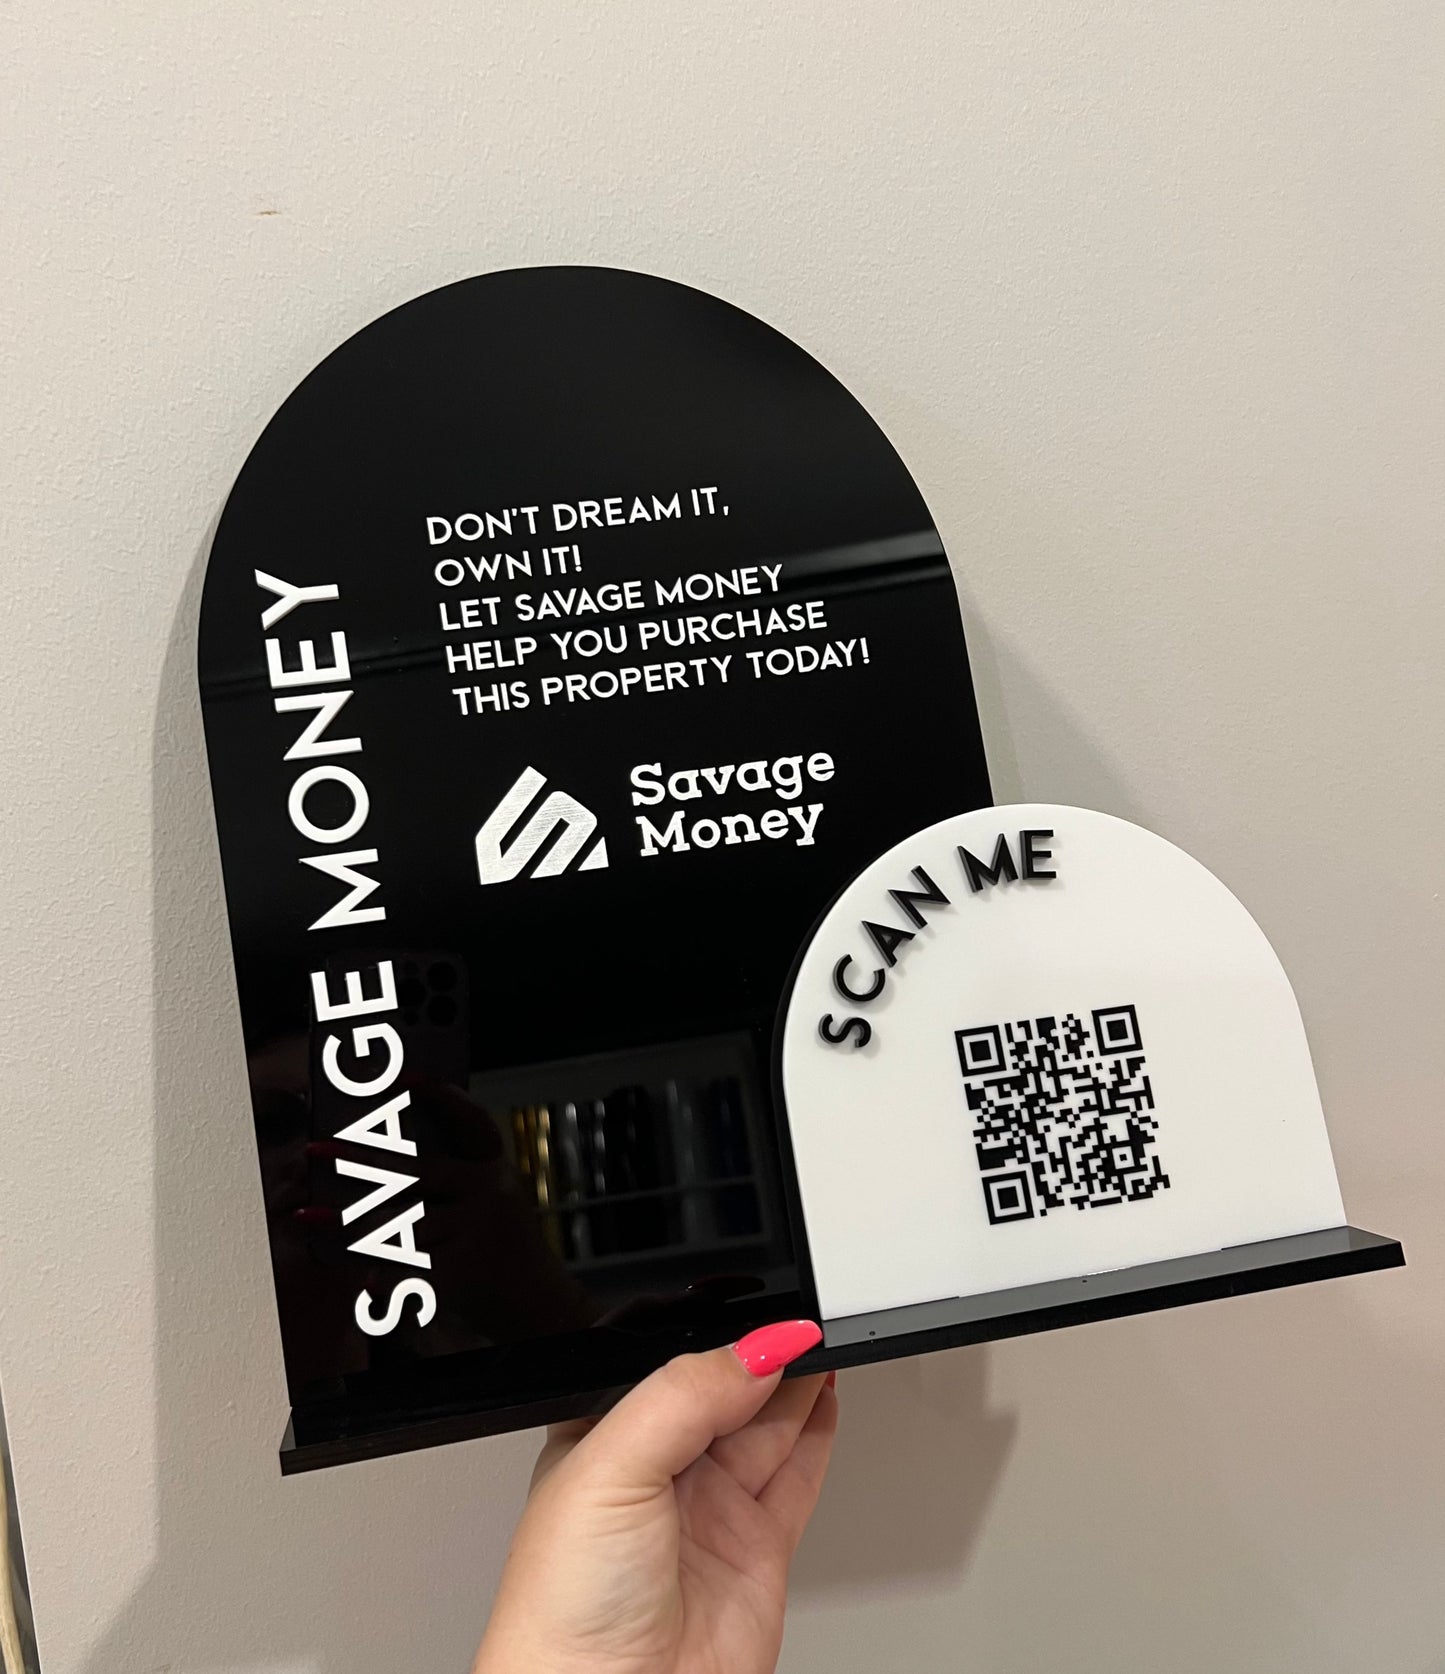 Gloss Black A4 Arch with 3D wording and Flat wording in White | Small White Acrylic Arch with 3D Black wording and flat QR Code in Black | Black Acrylic Stand